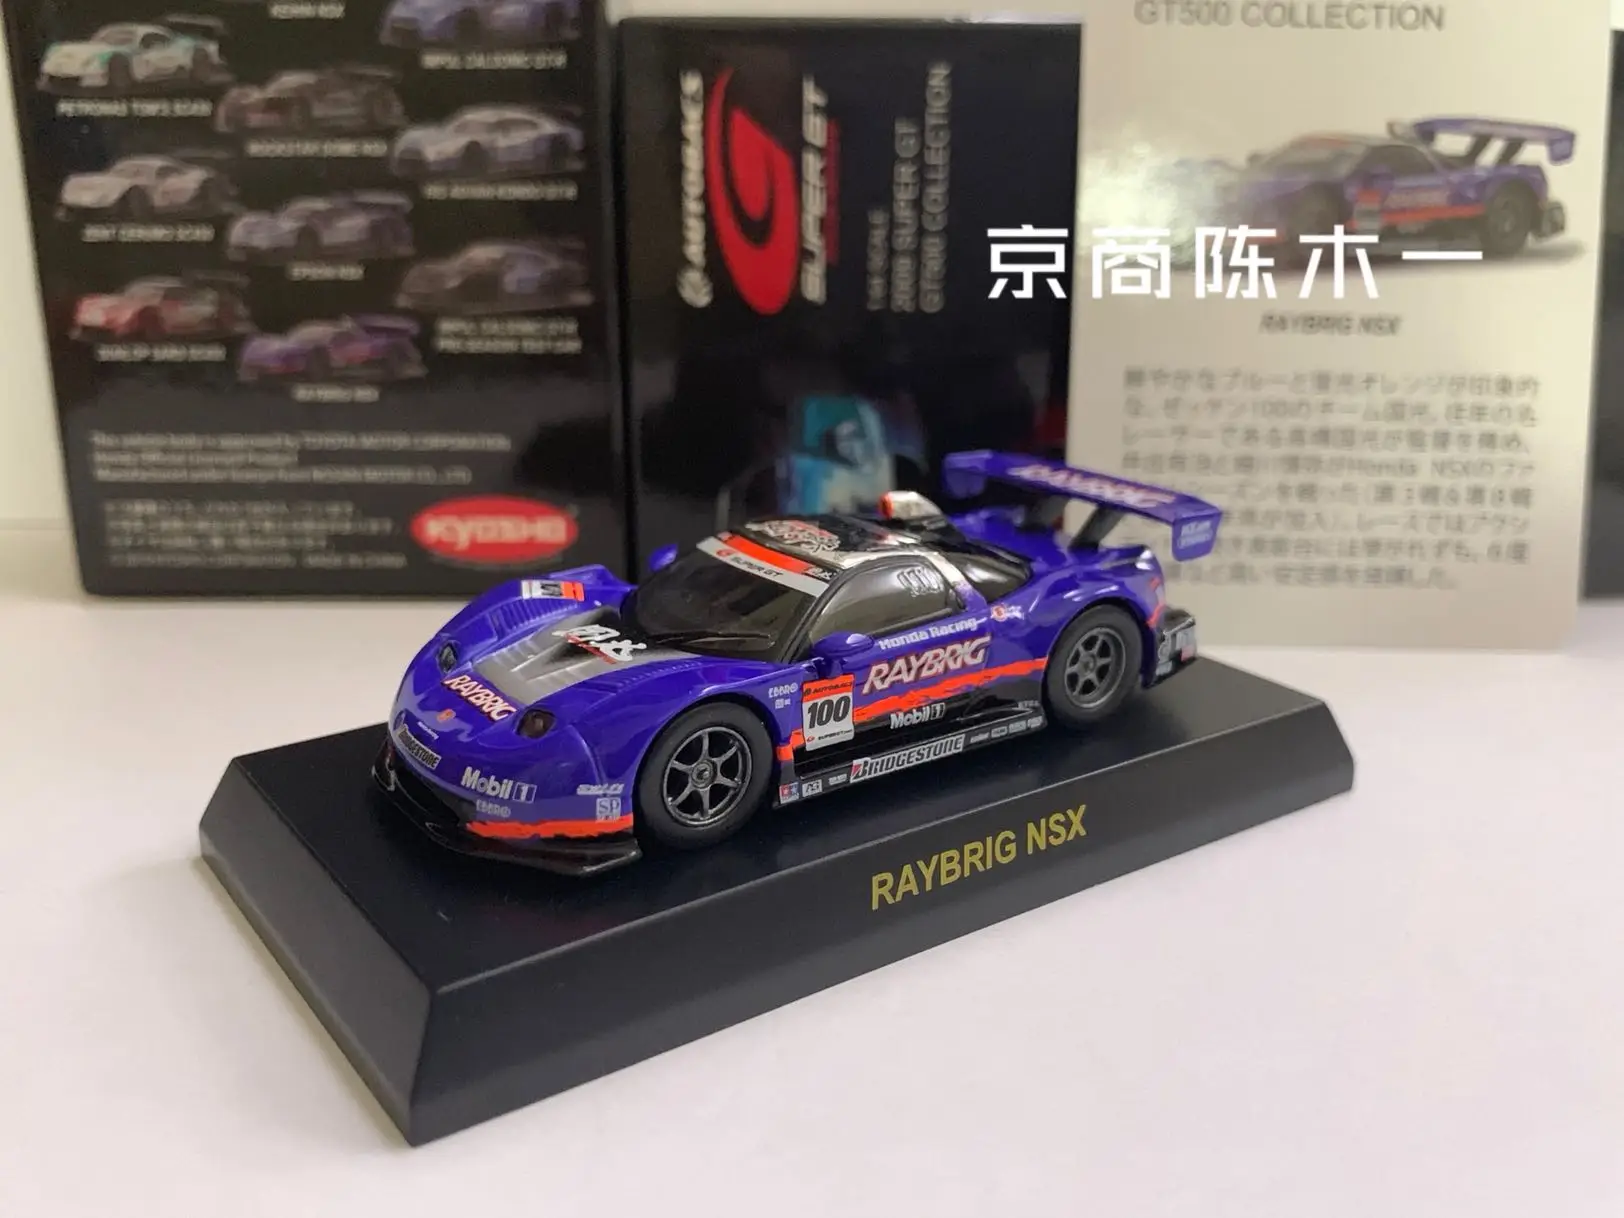 

1/64 KYOSHO Honda RAYBRIG NSX #100 Japanese GT race car Collection of die-cast alloy car decoration model toys